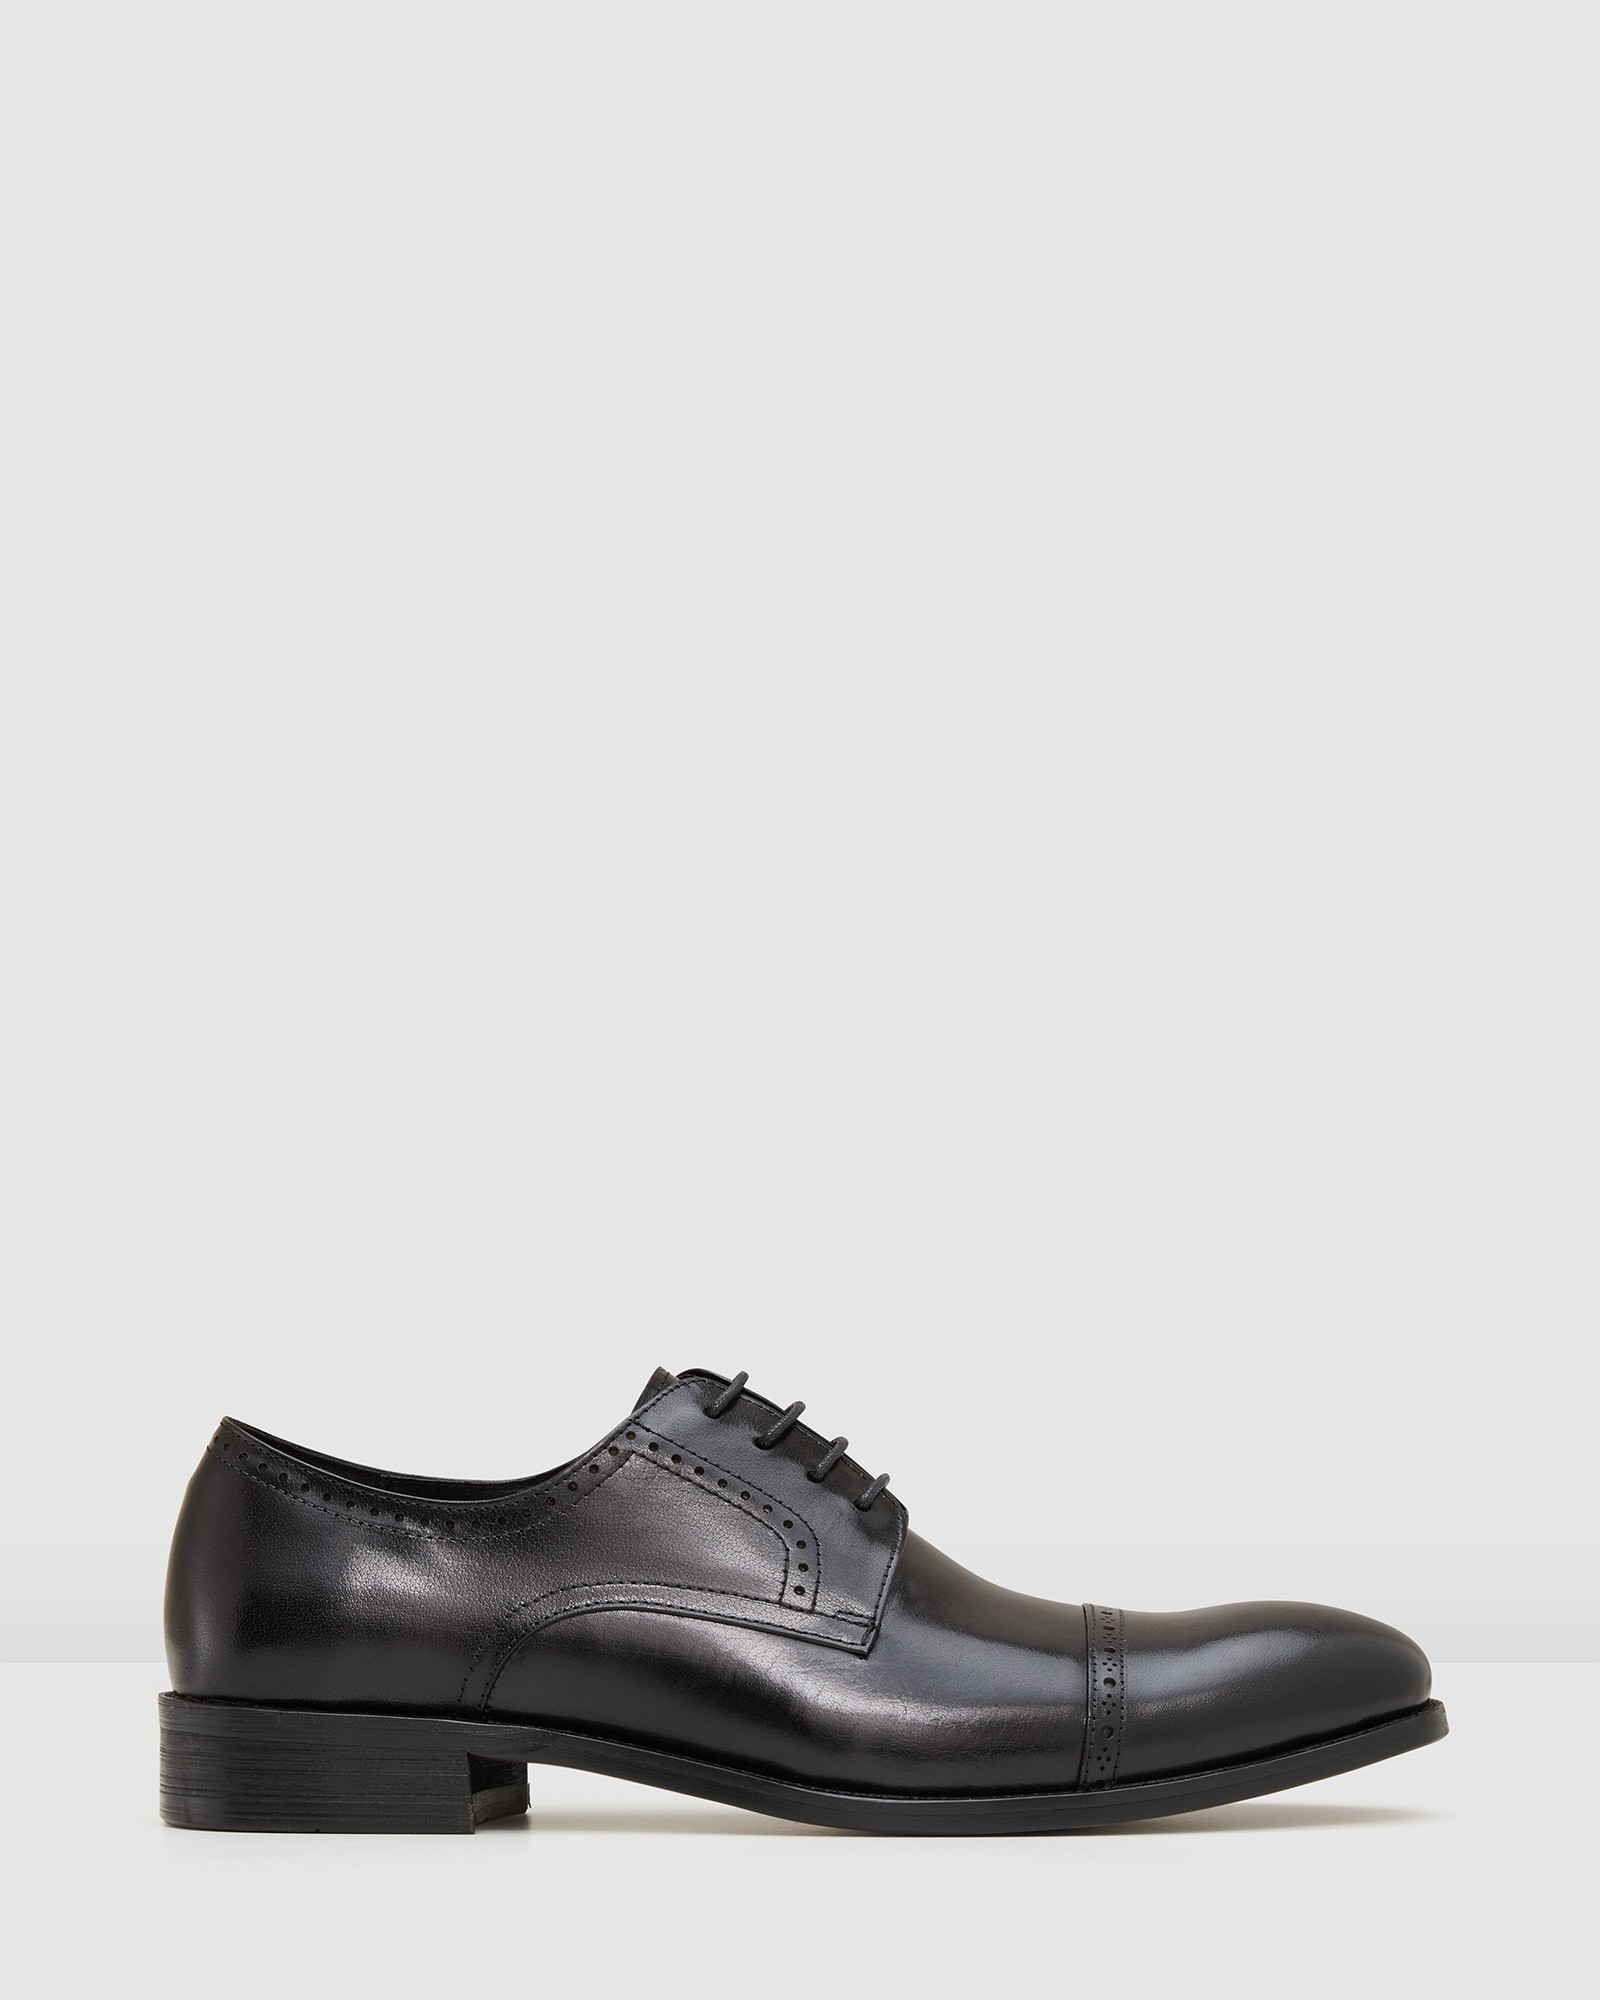 Galway Lace Ups Black by Aq By Aquila | ShoeSales